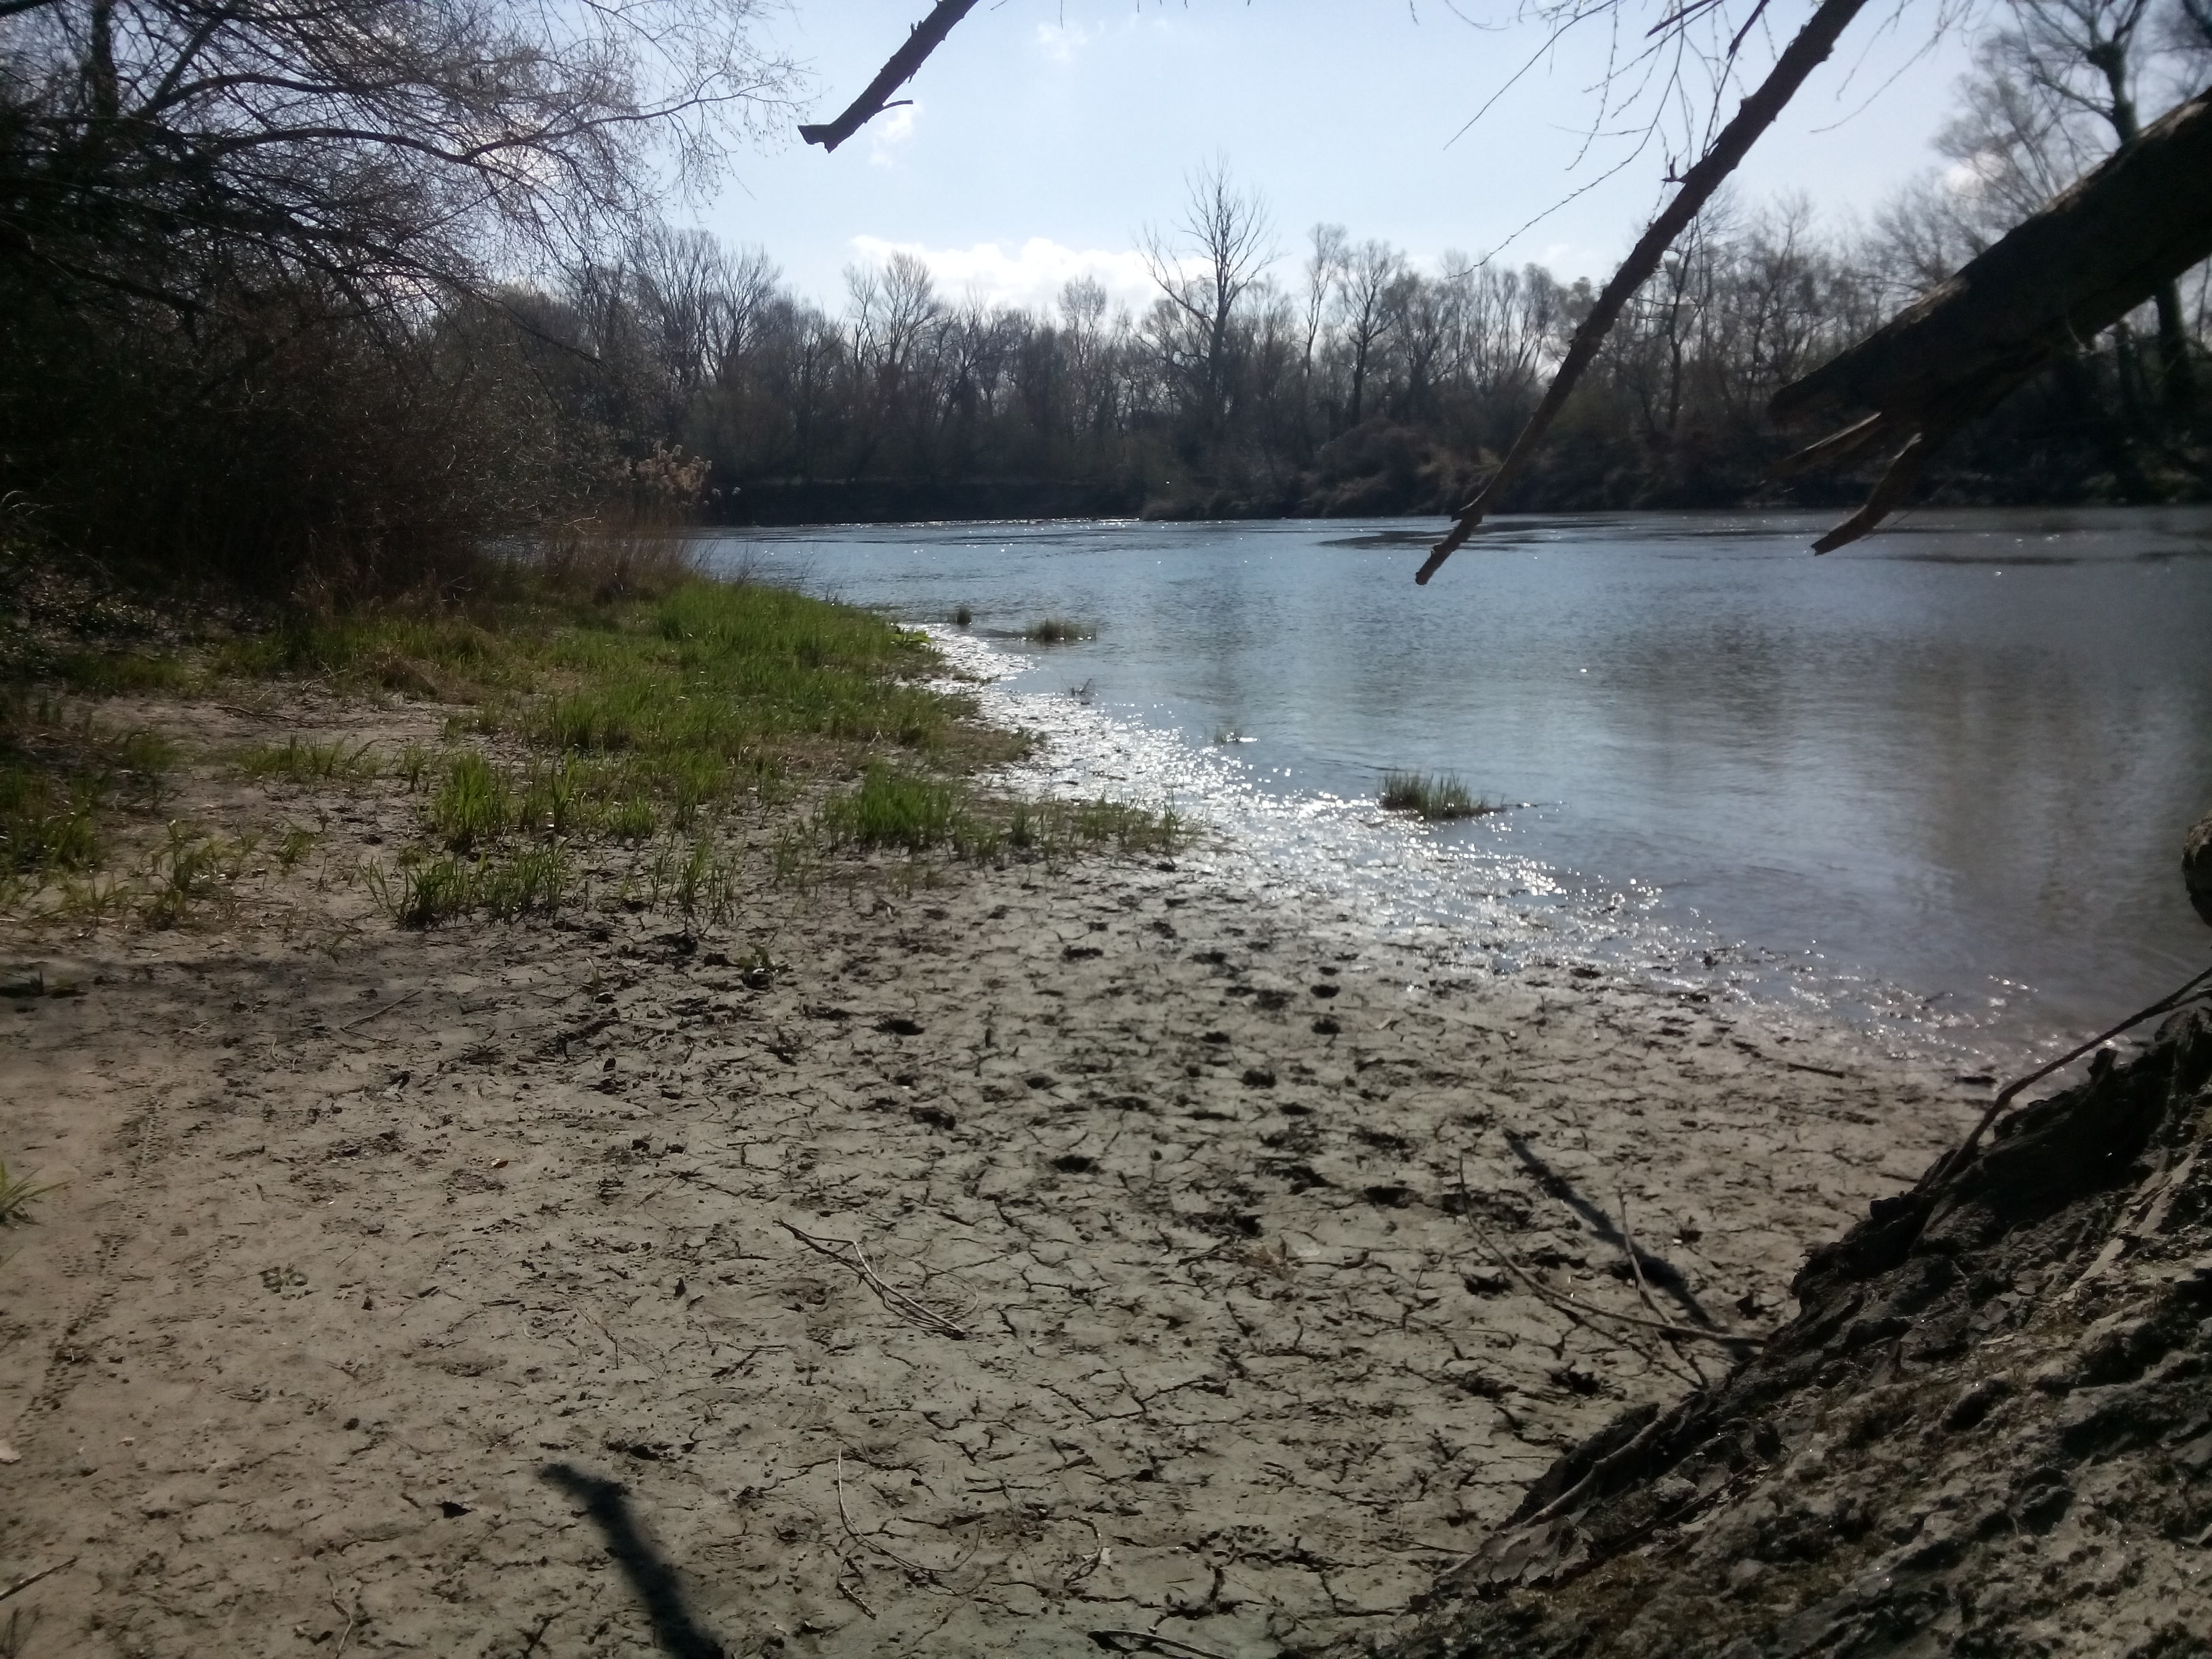 Sandy and grassy shore besides blue-brown river water